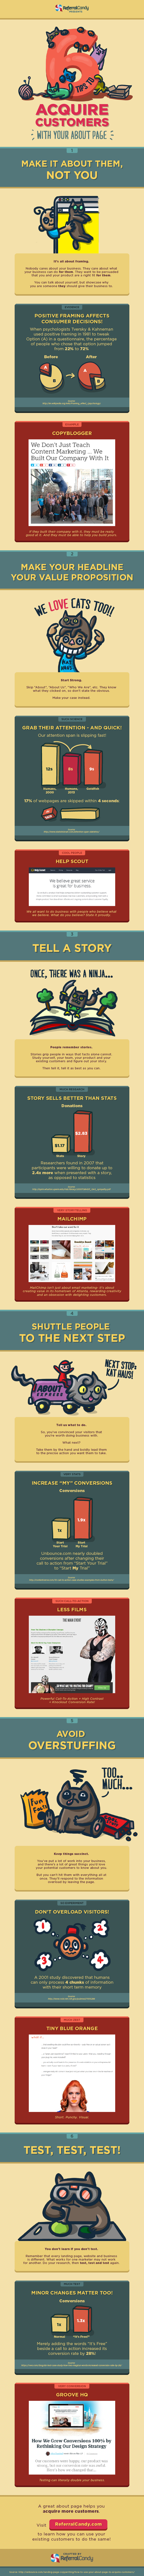 How To Acquire Sales and leads With Your About Page - #infographic